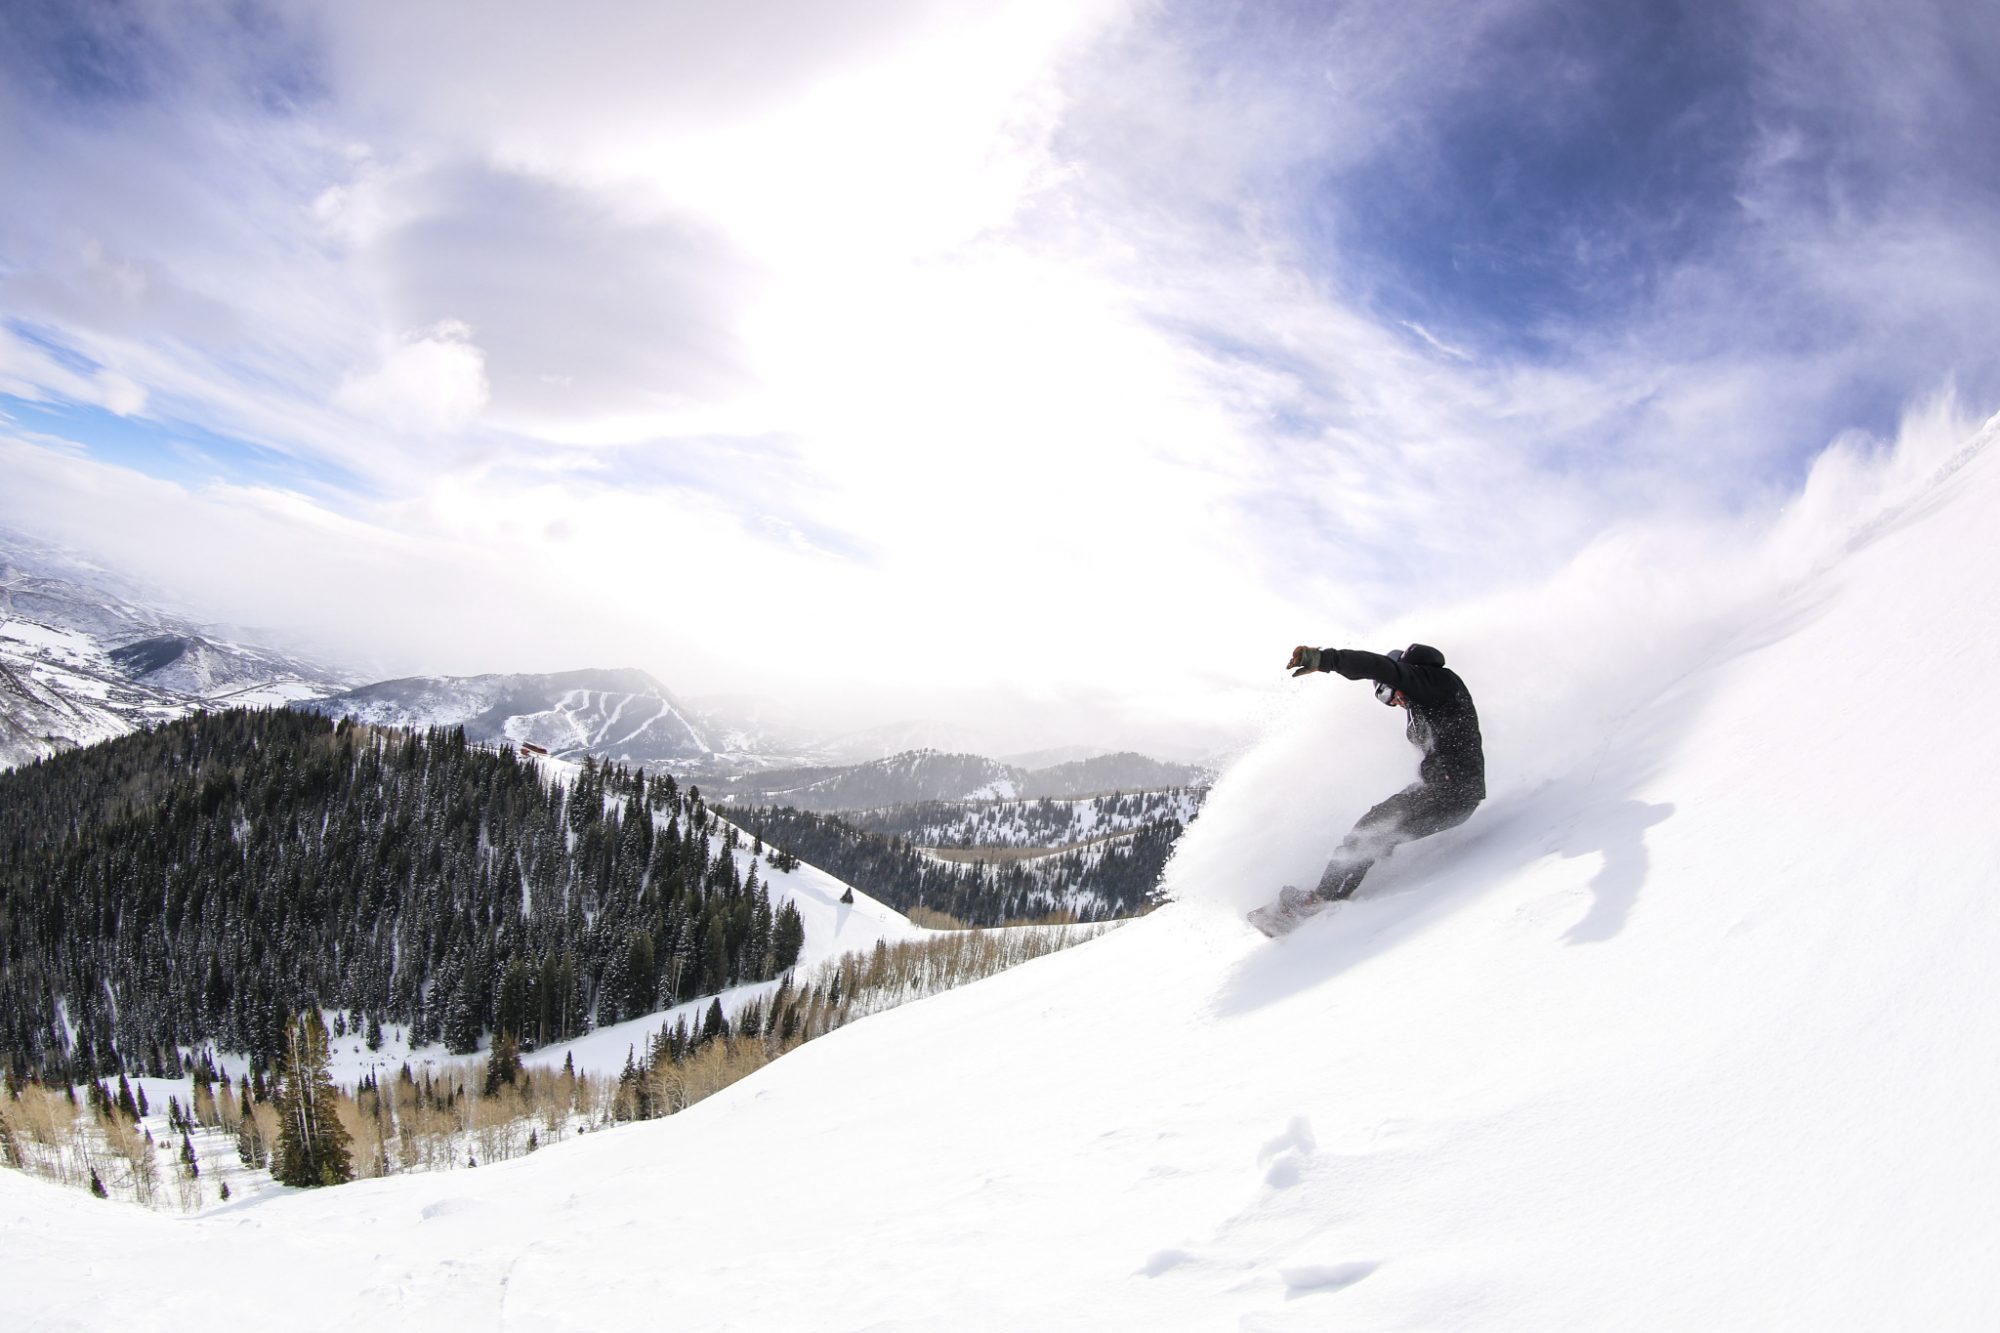 Park City Murdocks. Photo: Vail Resorts. Vail Resorts Announces Pending Sale of Park City Mountain Base Area Site for Mixed-Use Project Development